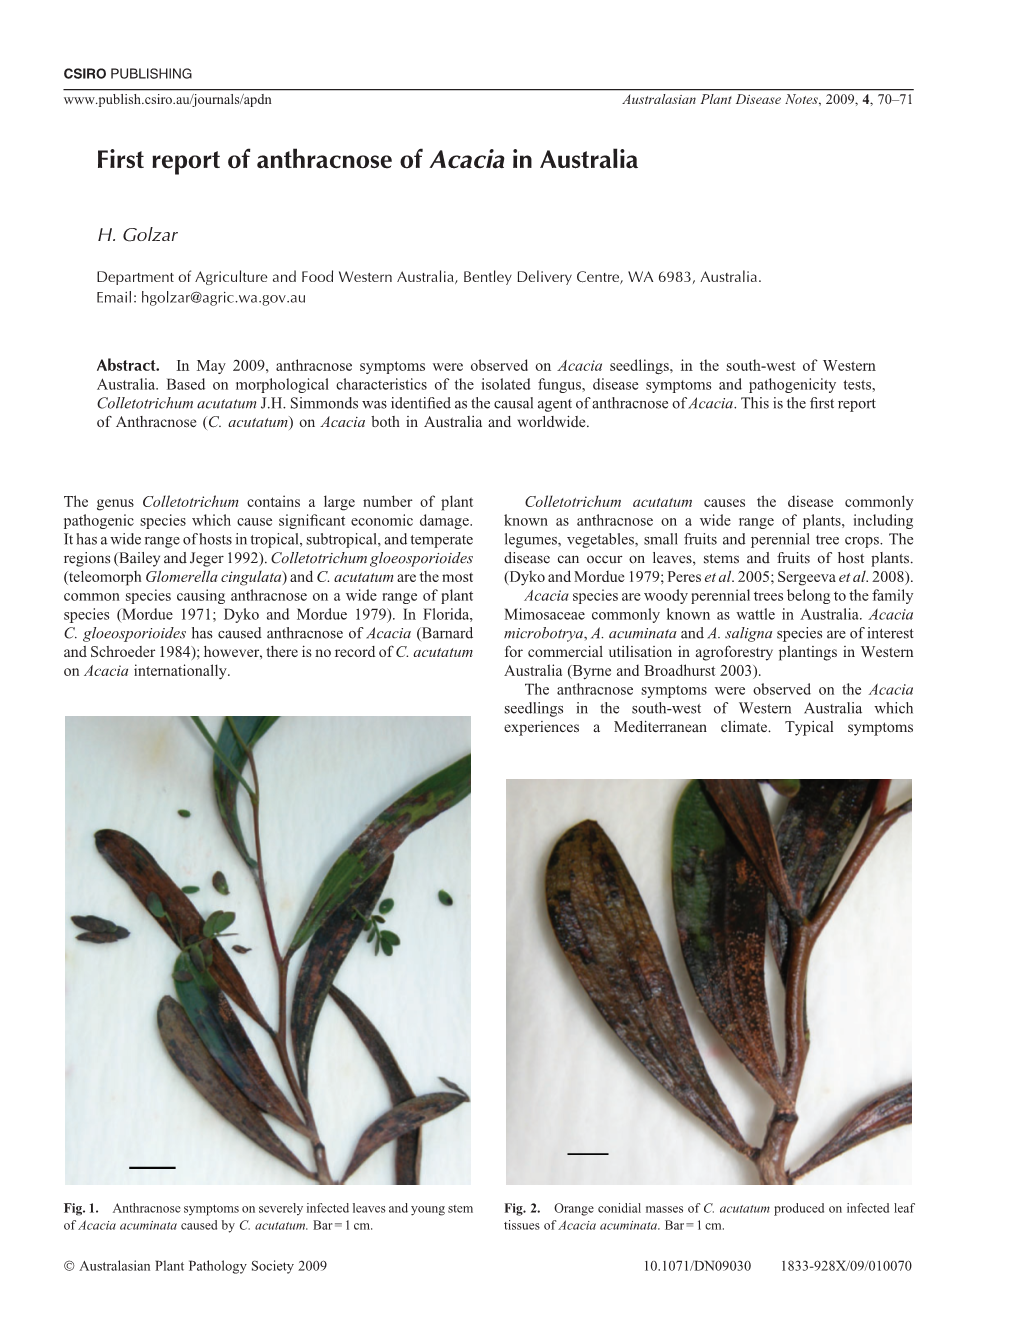 First Report of Anthracnose of Acacia in Australia